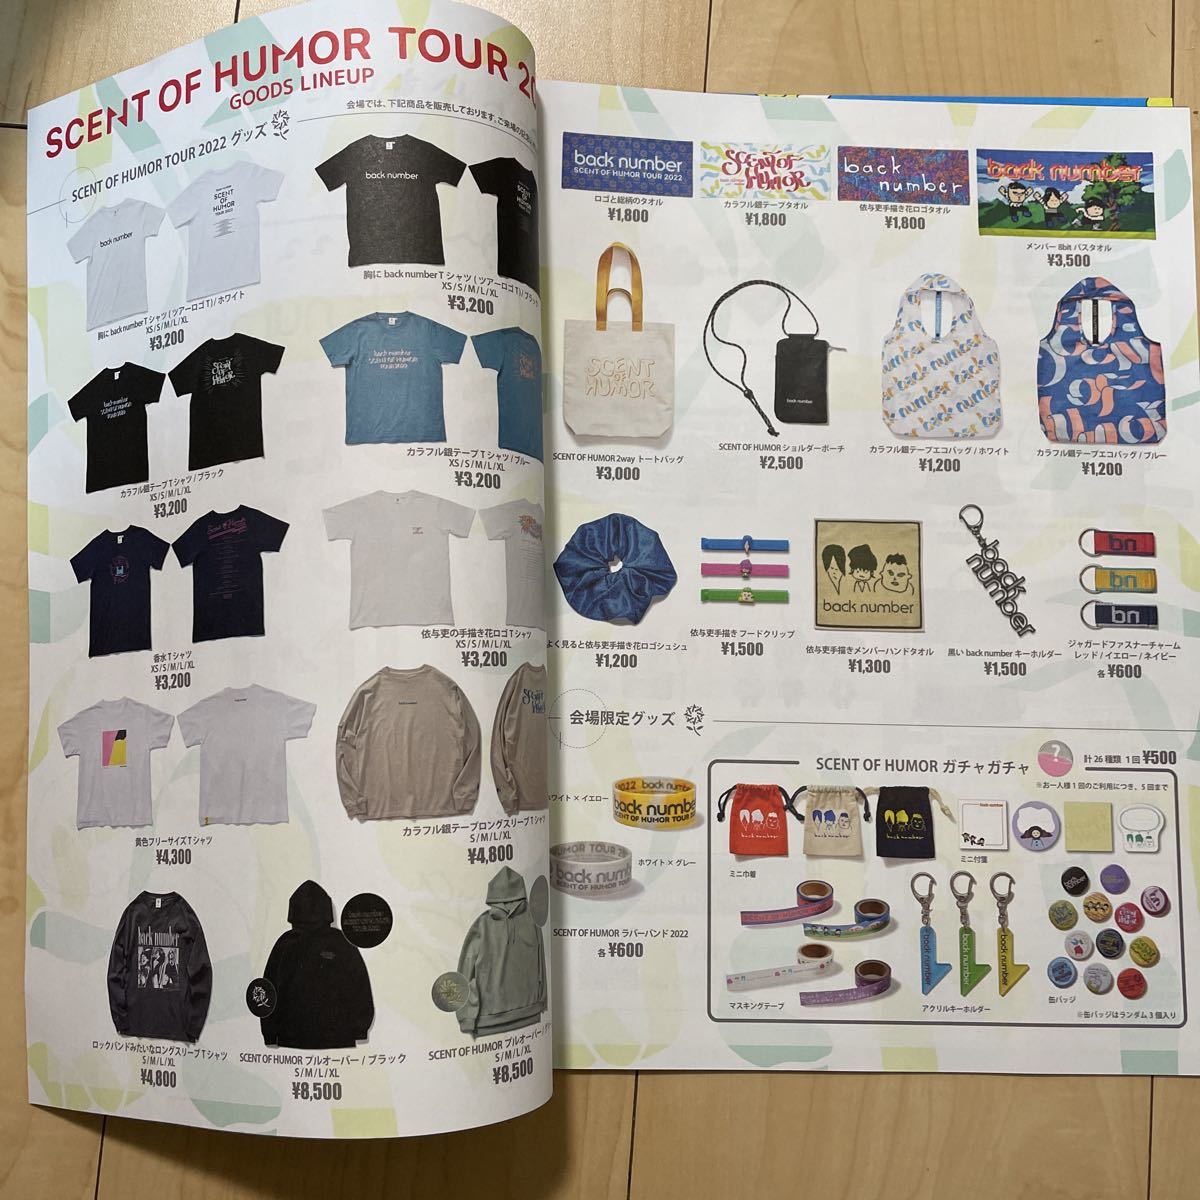 back number SCENT OF HUMOR TOUR 2022 パンフレット バックナンバー サイン印字 フライヤー 非売品 ライブ ツアー グッズ 配布品_画像2